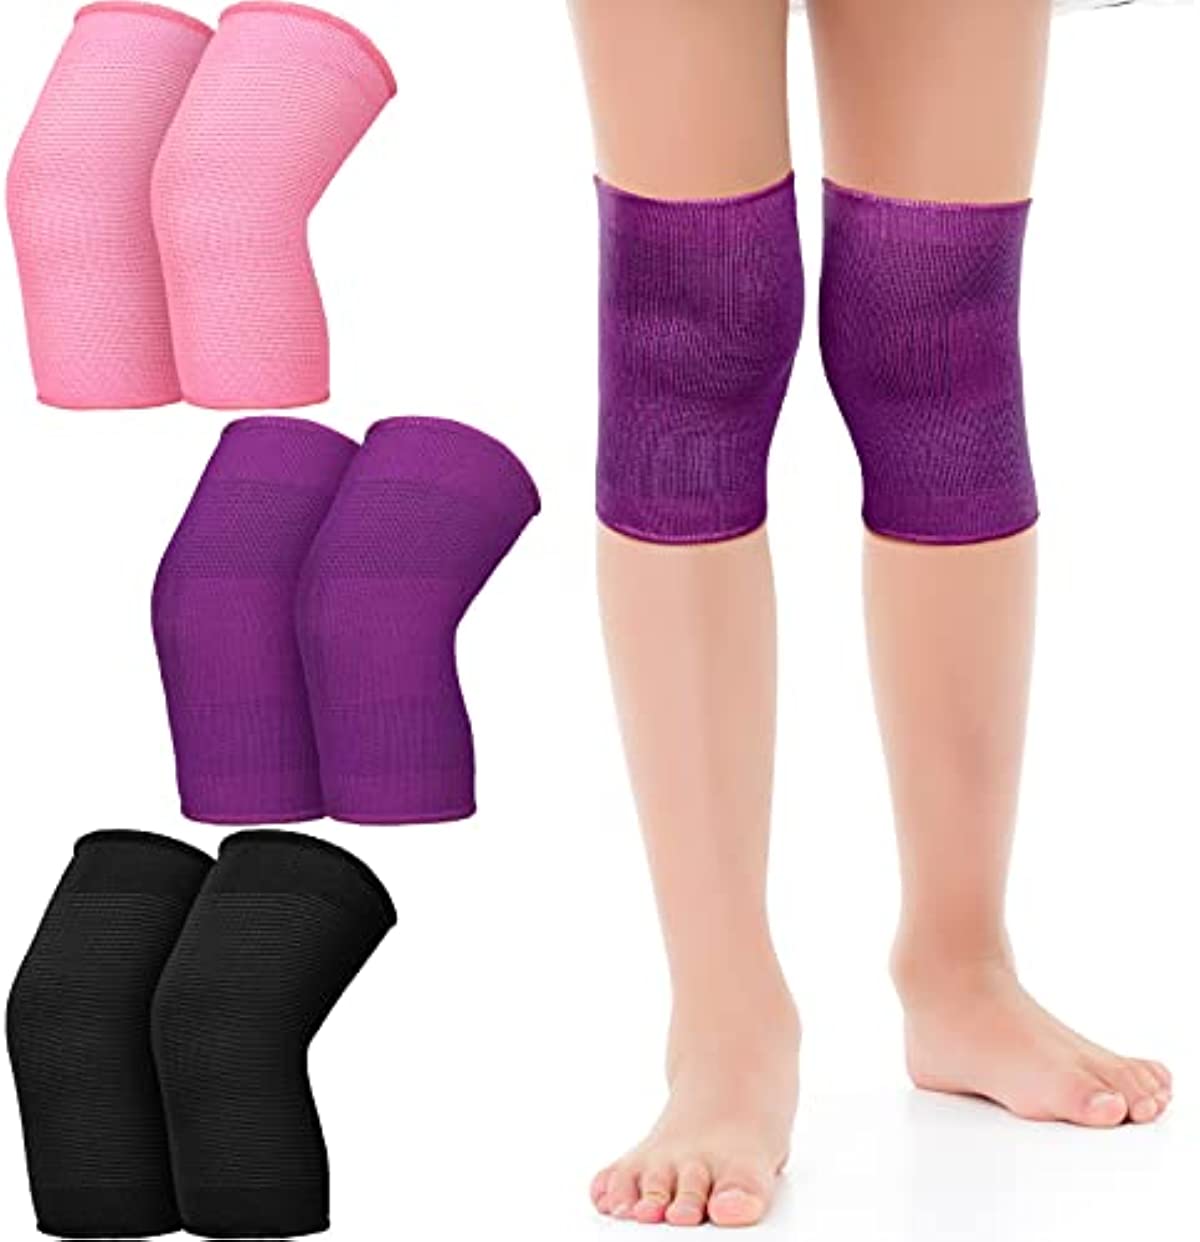 3 Pairs Kids Knee Brace Children Patella Pad Support Breathable Flexible Elastic Knee Protector Compression Knee Sleeves for Girls Boys Volleyball Basketball Dance Skating (Medium)